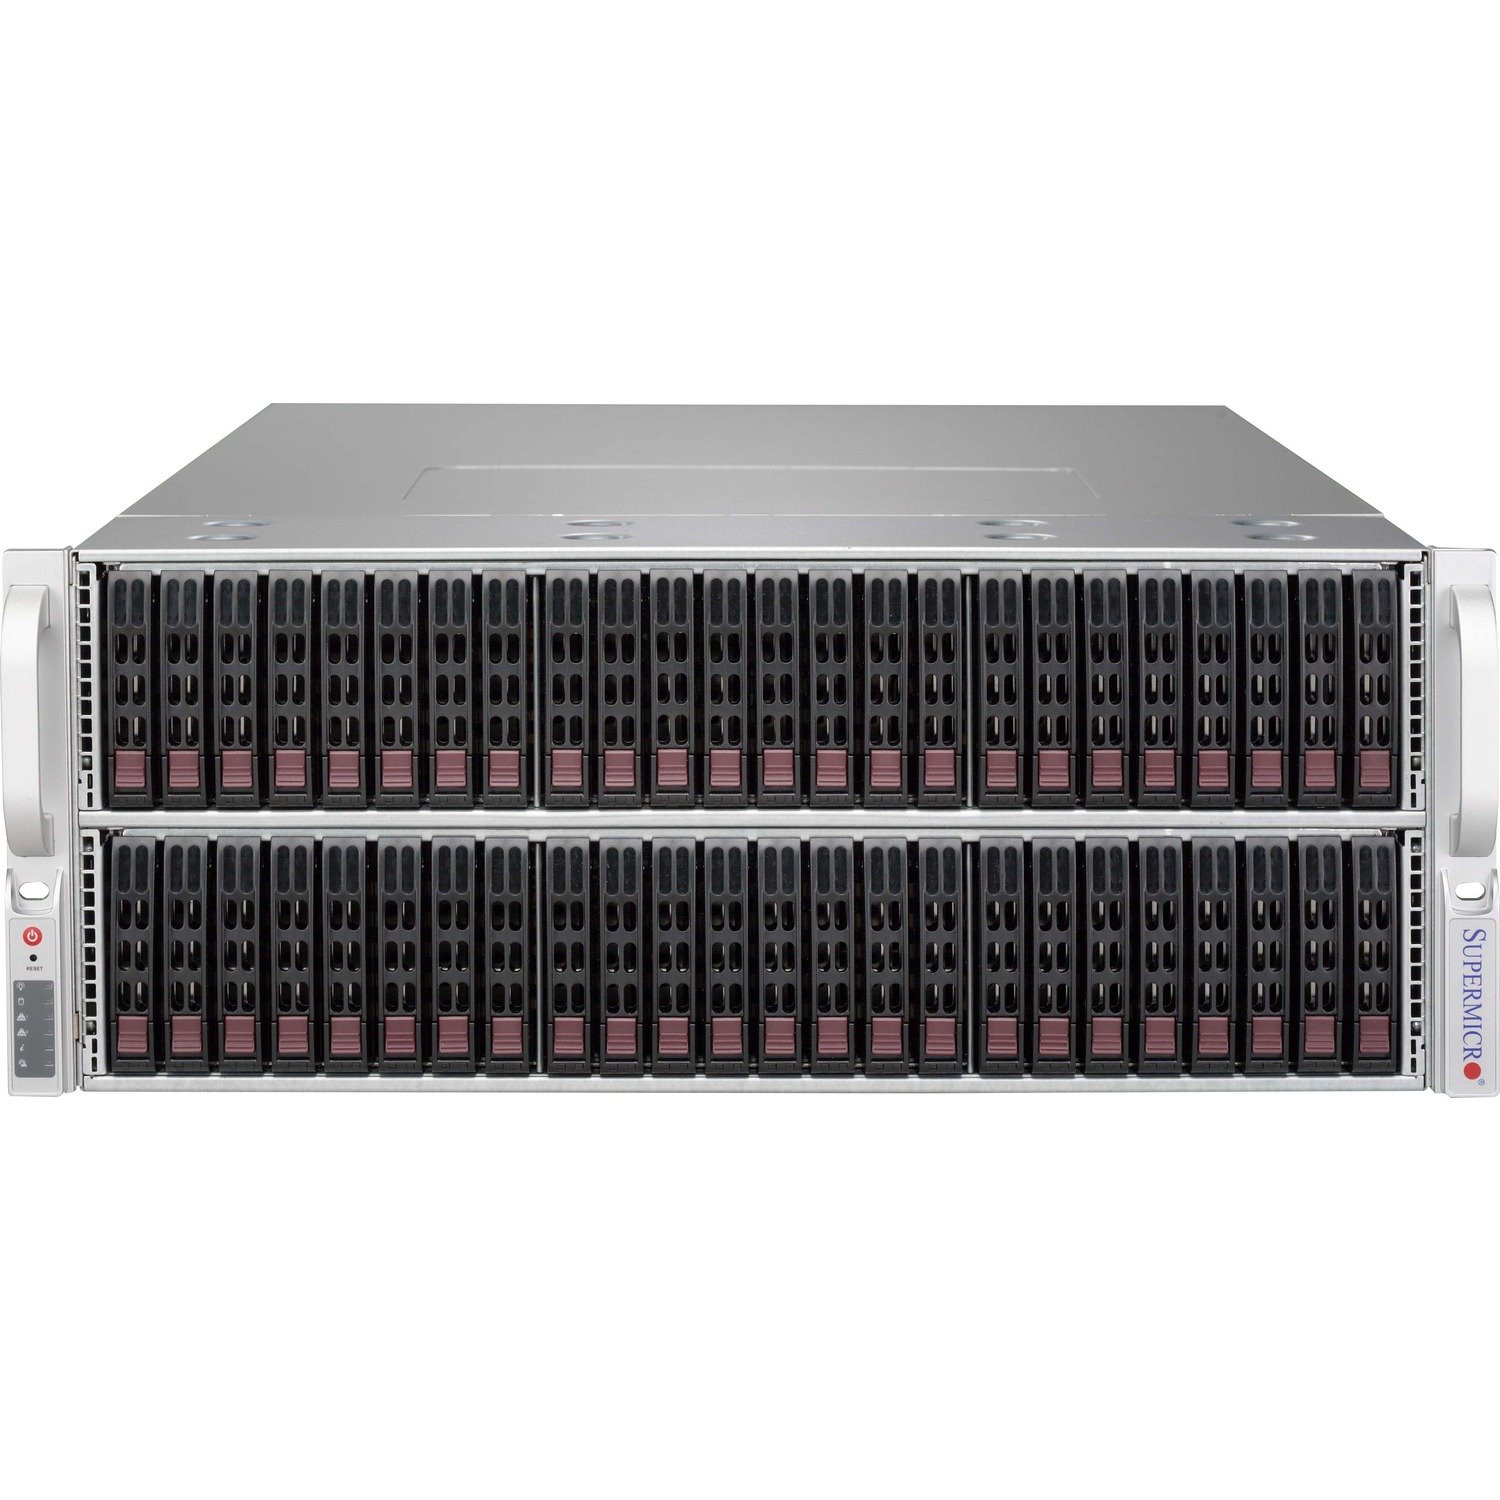 Supermicro SuperChassis 417BE1C-R1K28WB